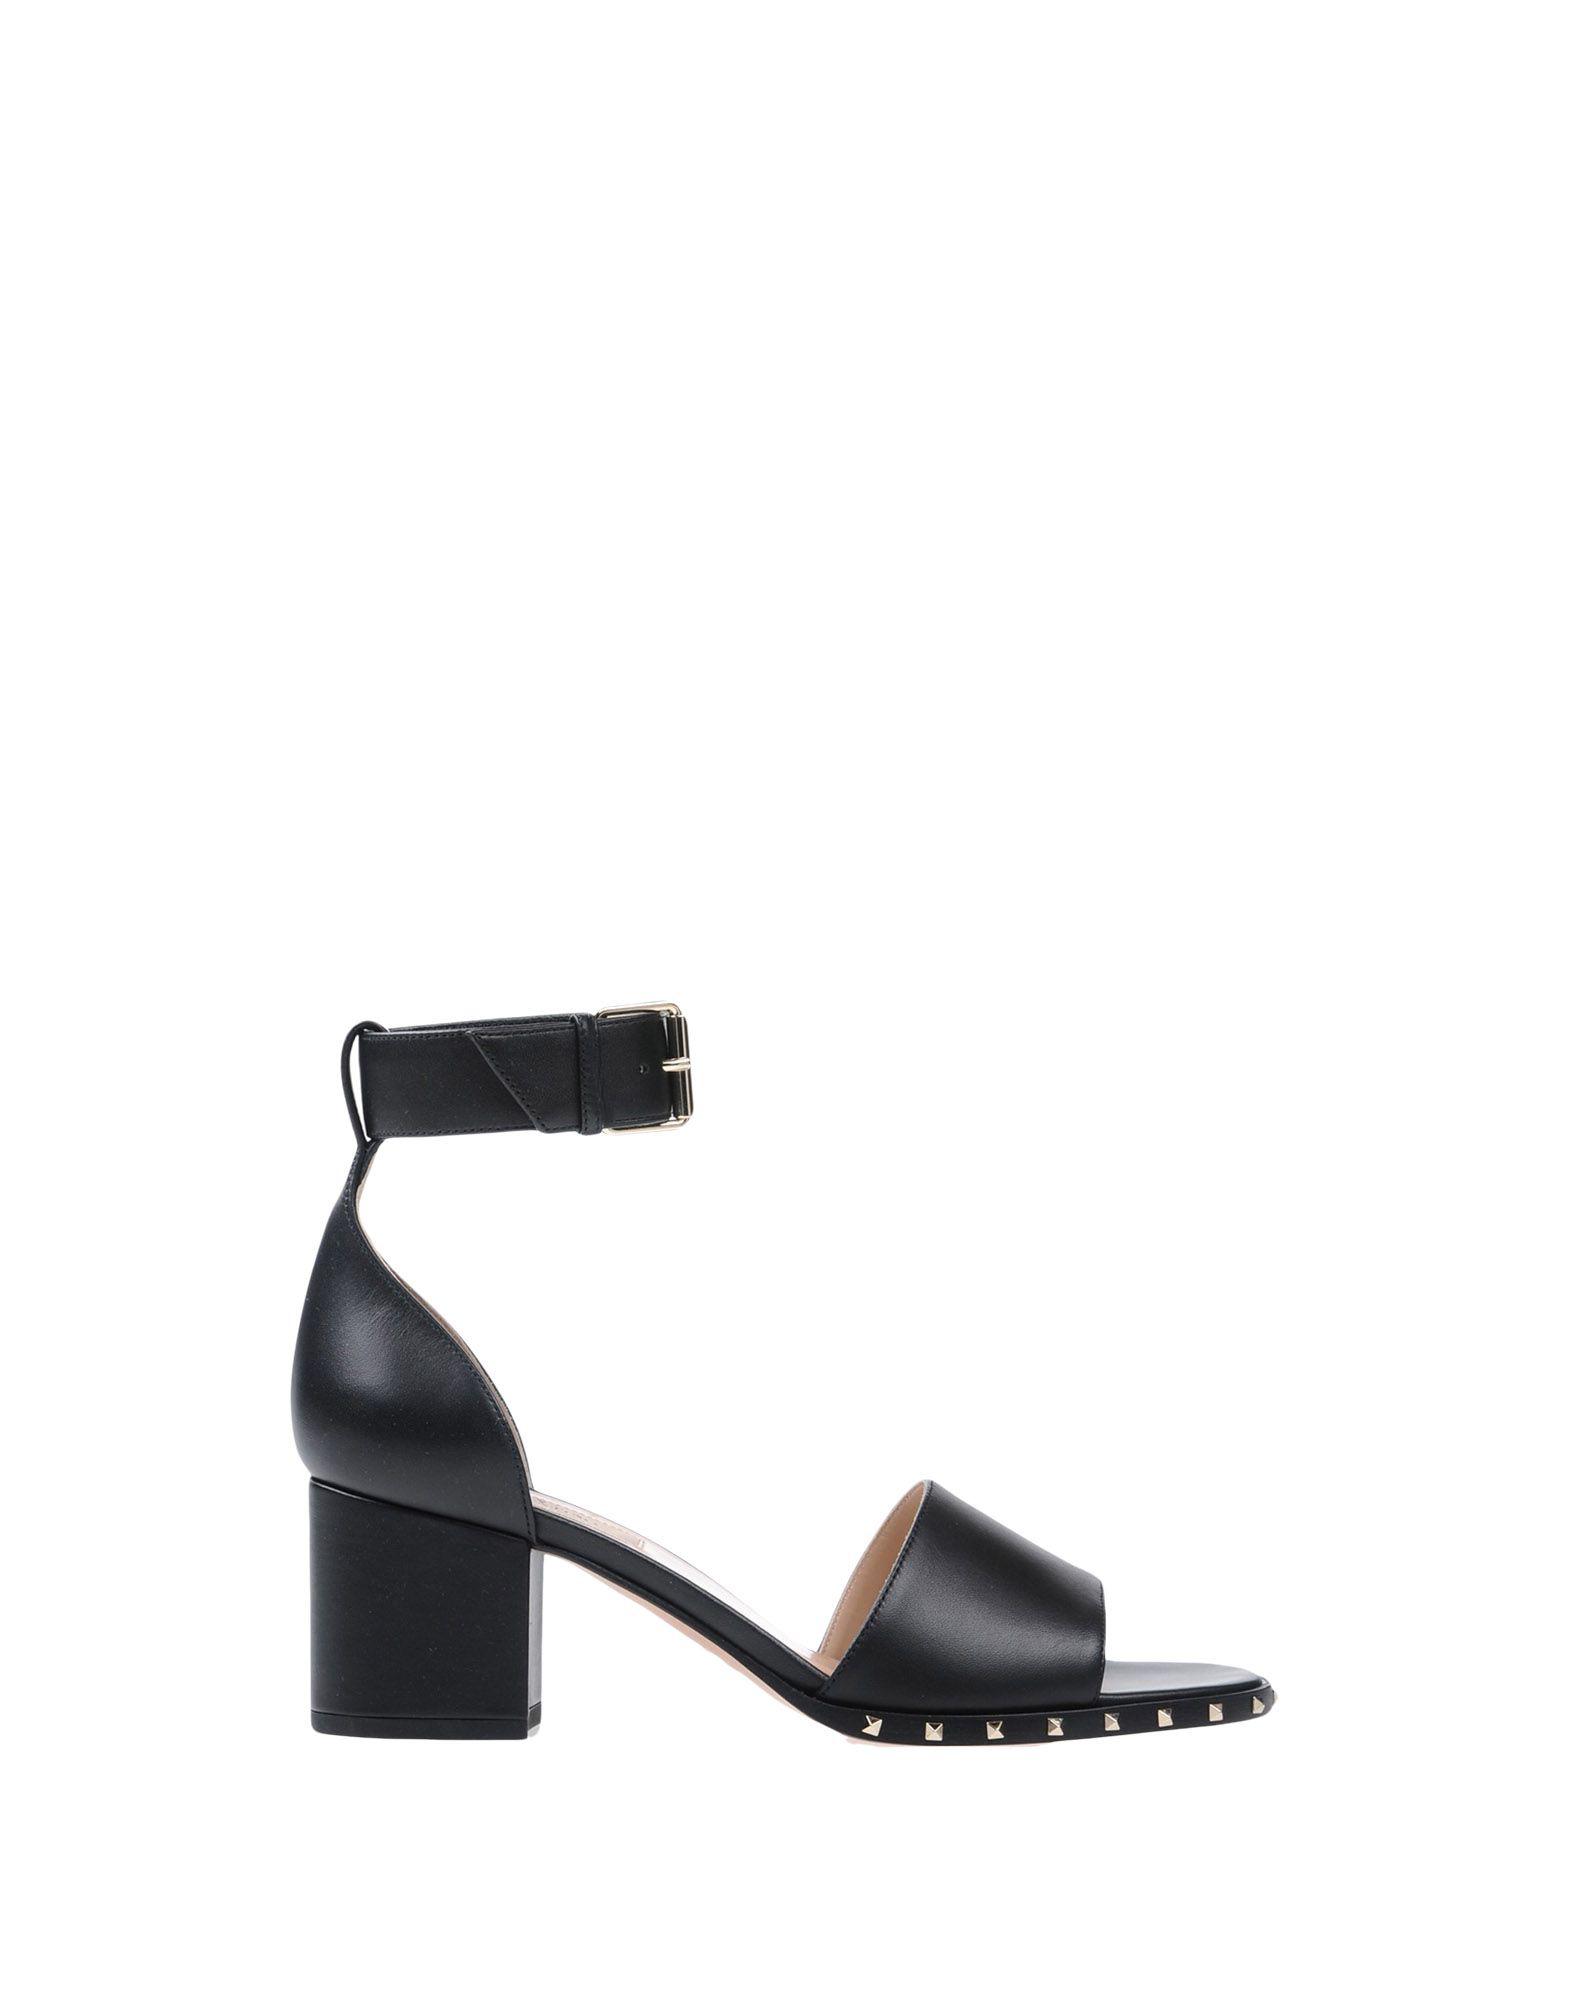 Valentino Leather Sandals in Black - Lyst